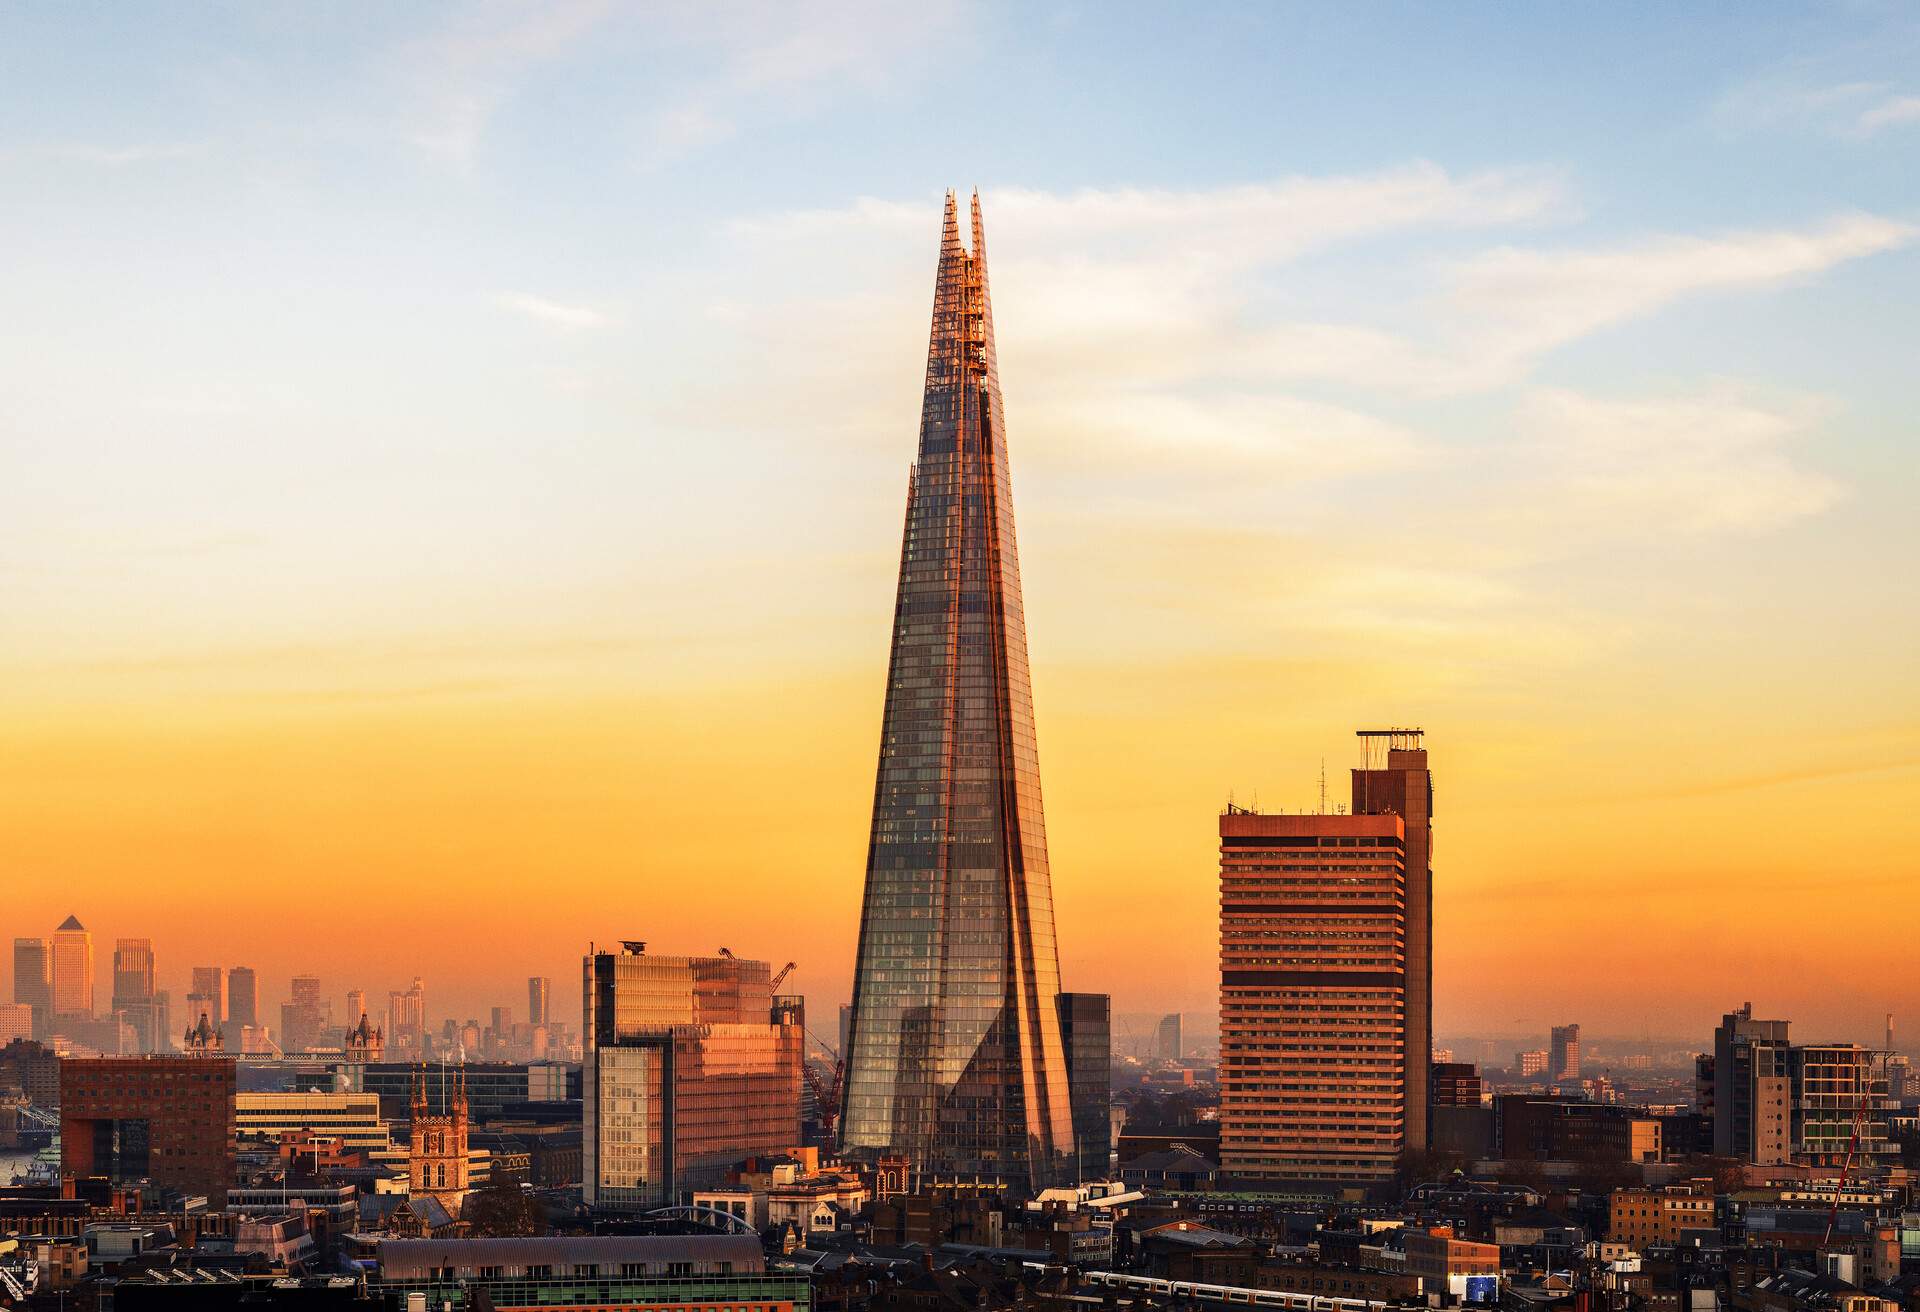 DEST_ENGLAND_LONDON_THE_SHARD_SUNSET_GettyImages-627813250